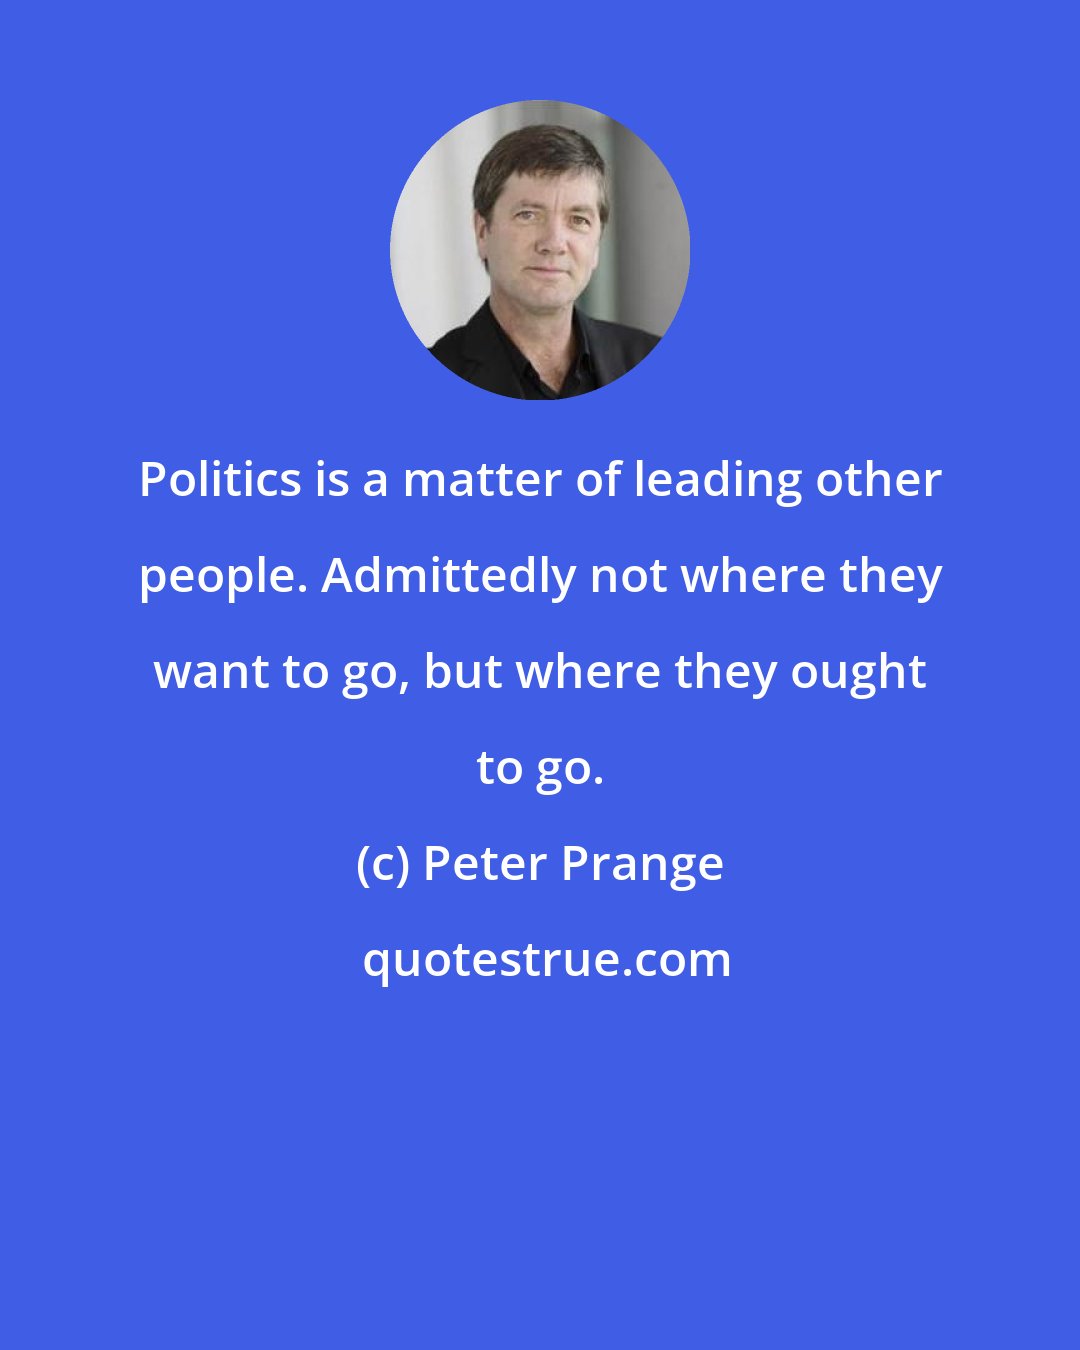 Peter Prange: Politics is a matter of leading other people. Admittedly not where they want to go, but where they ought to go.